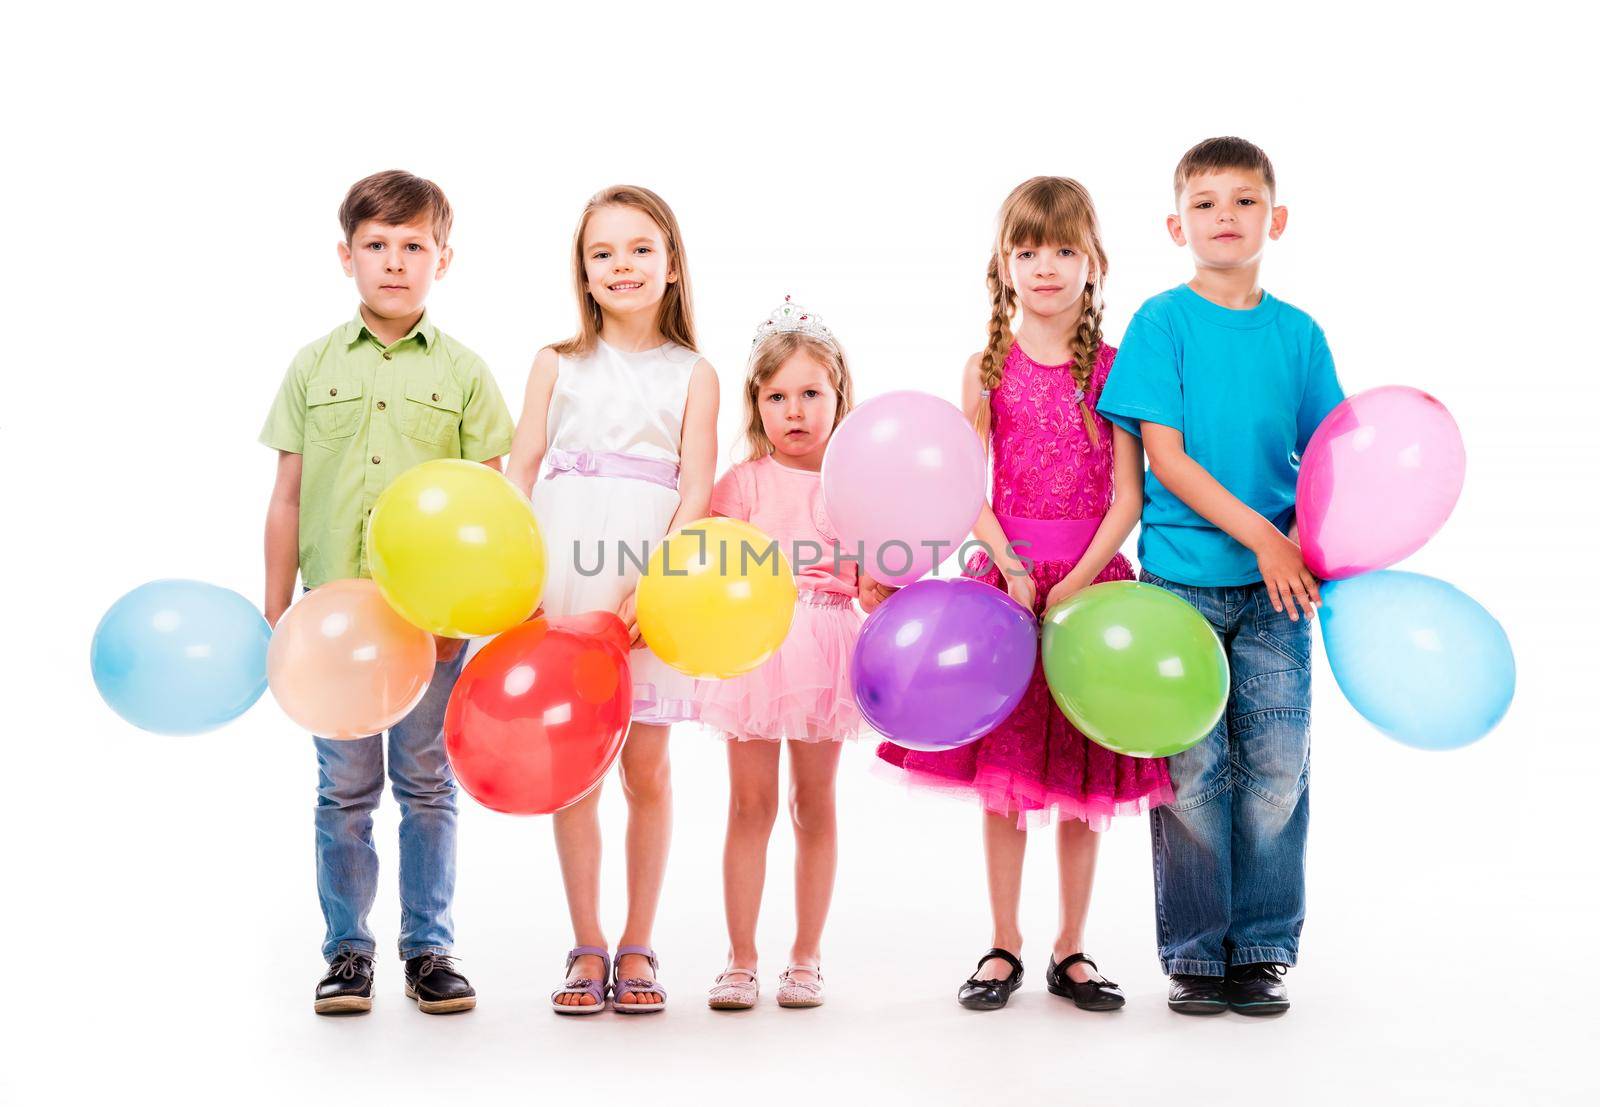 cute children celebrating birthday with decorations